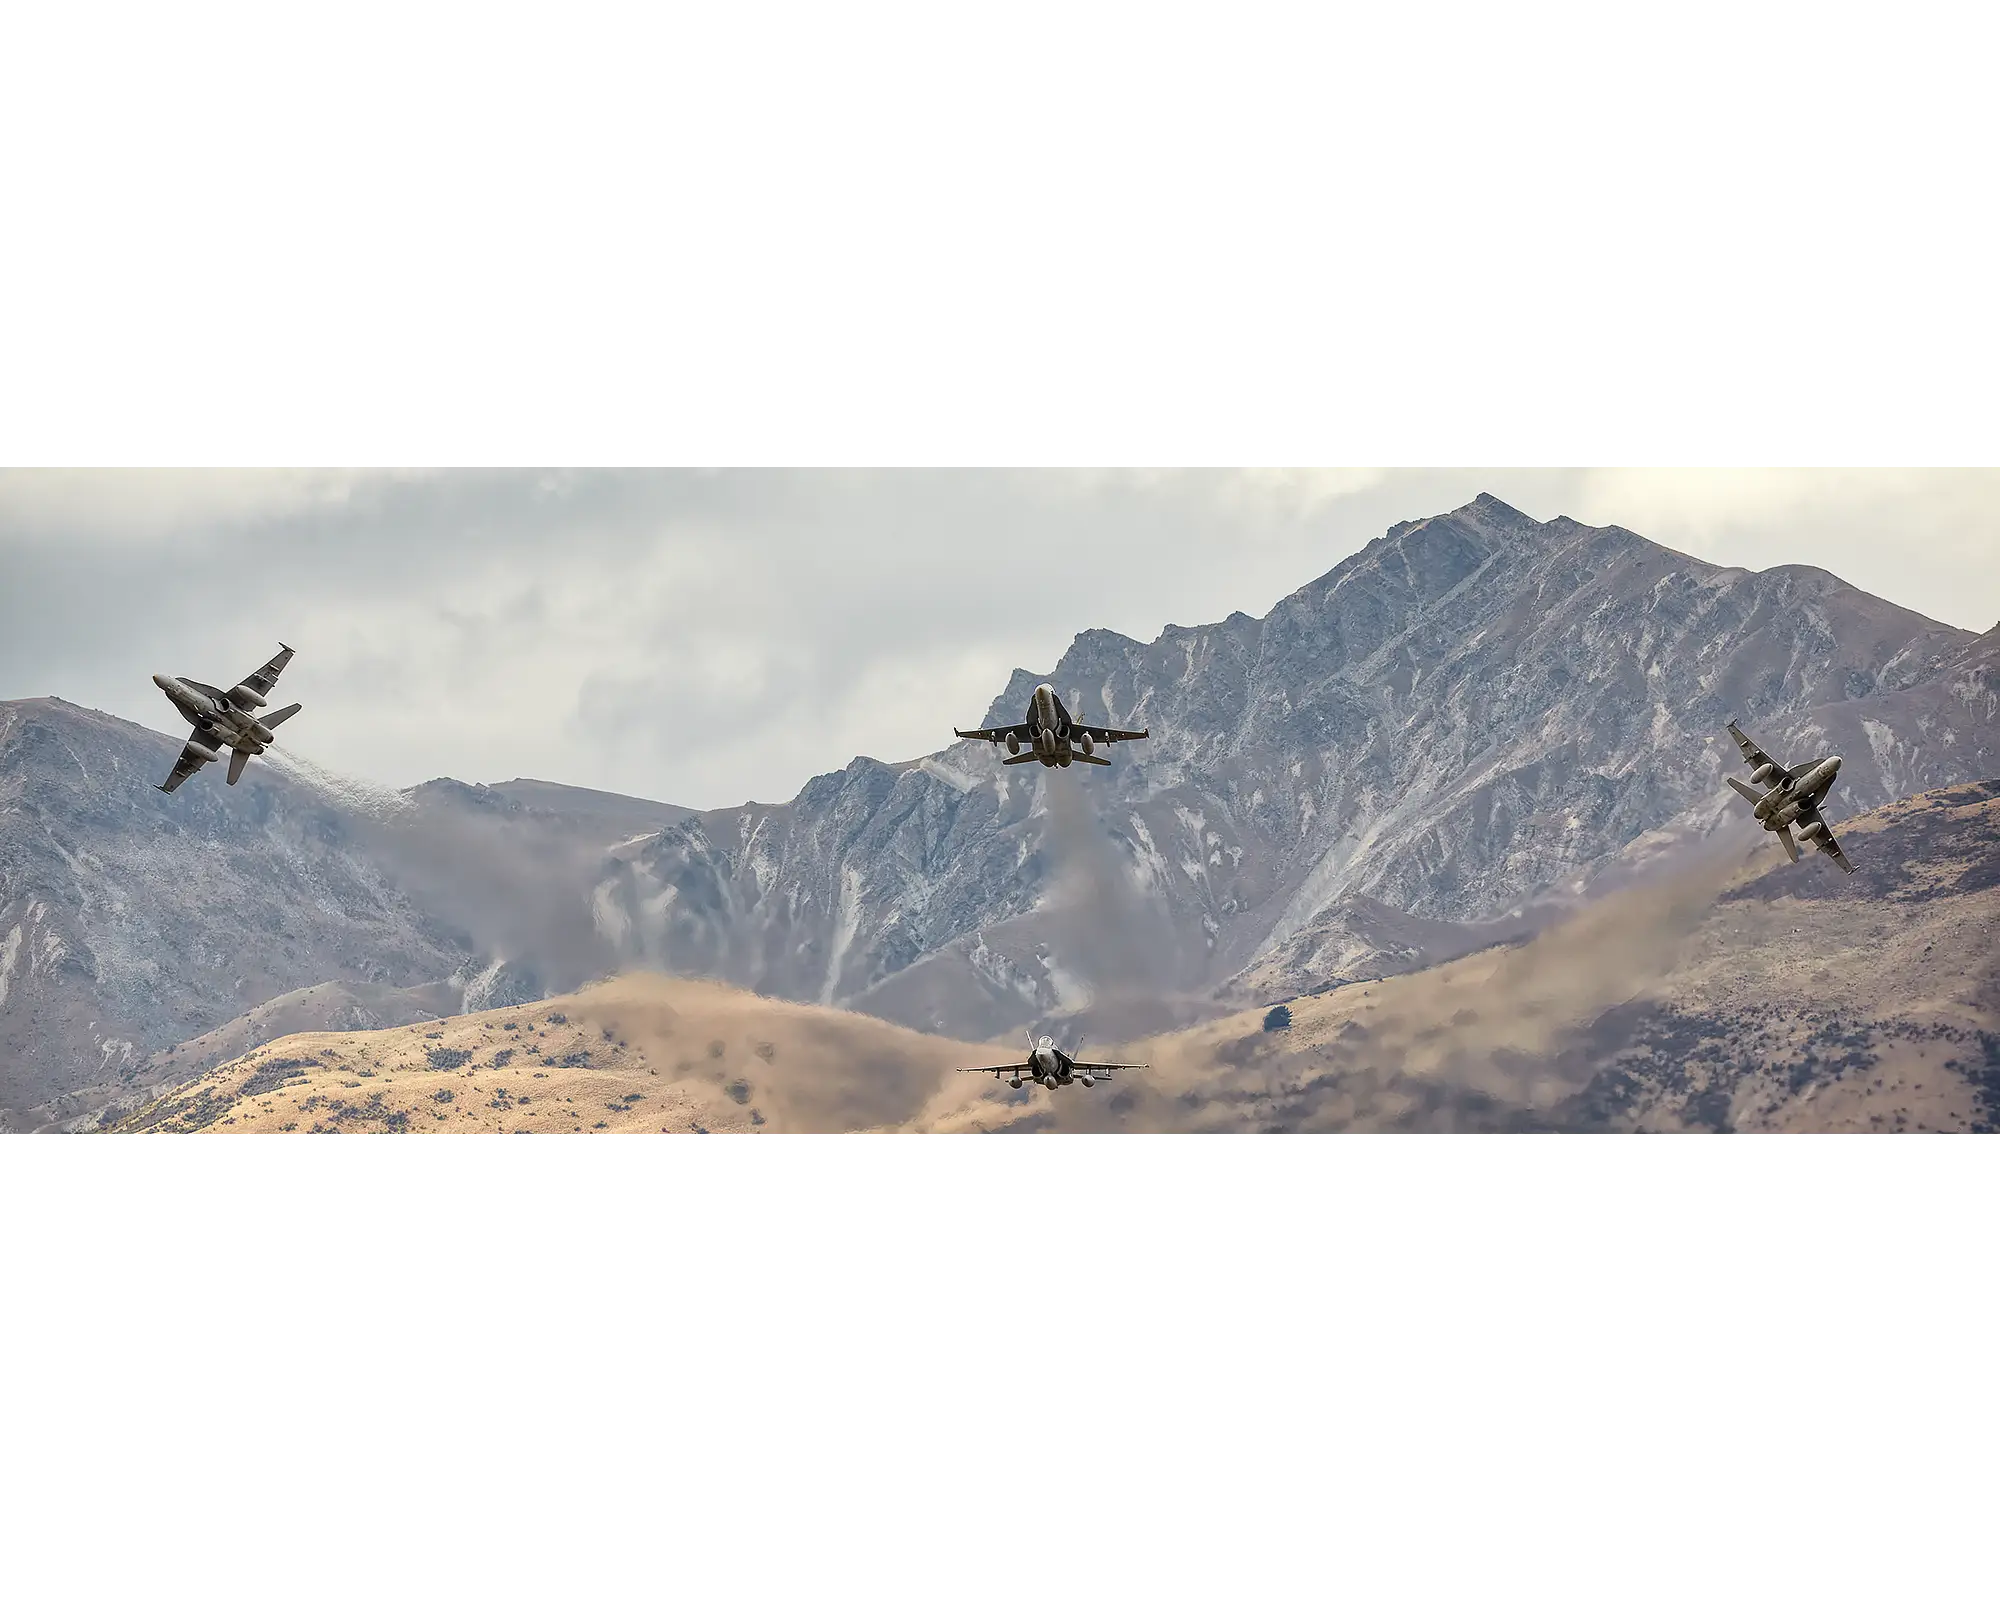 Mountain Bomb Burst. Royal Australian Air Force F/A-18 Hornets from 3 Squadron fly in front of New Zealand mountain range.